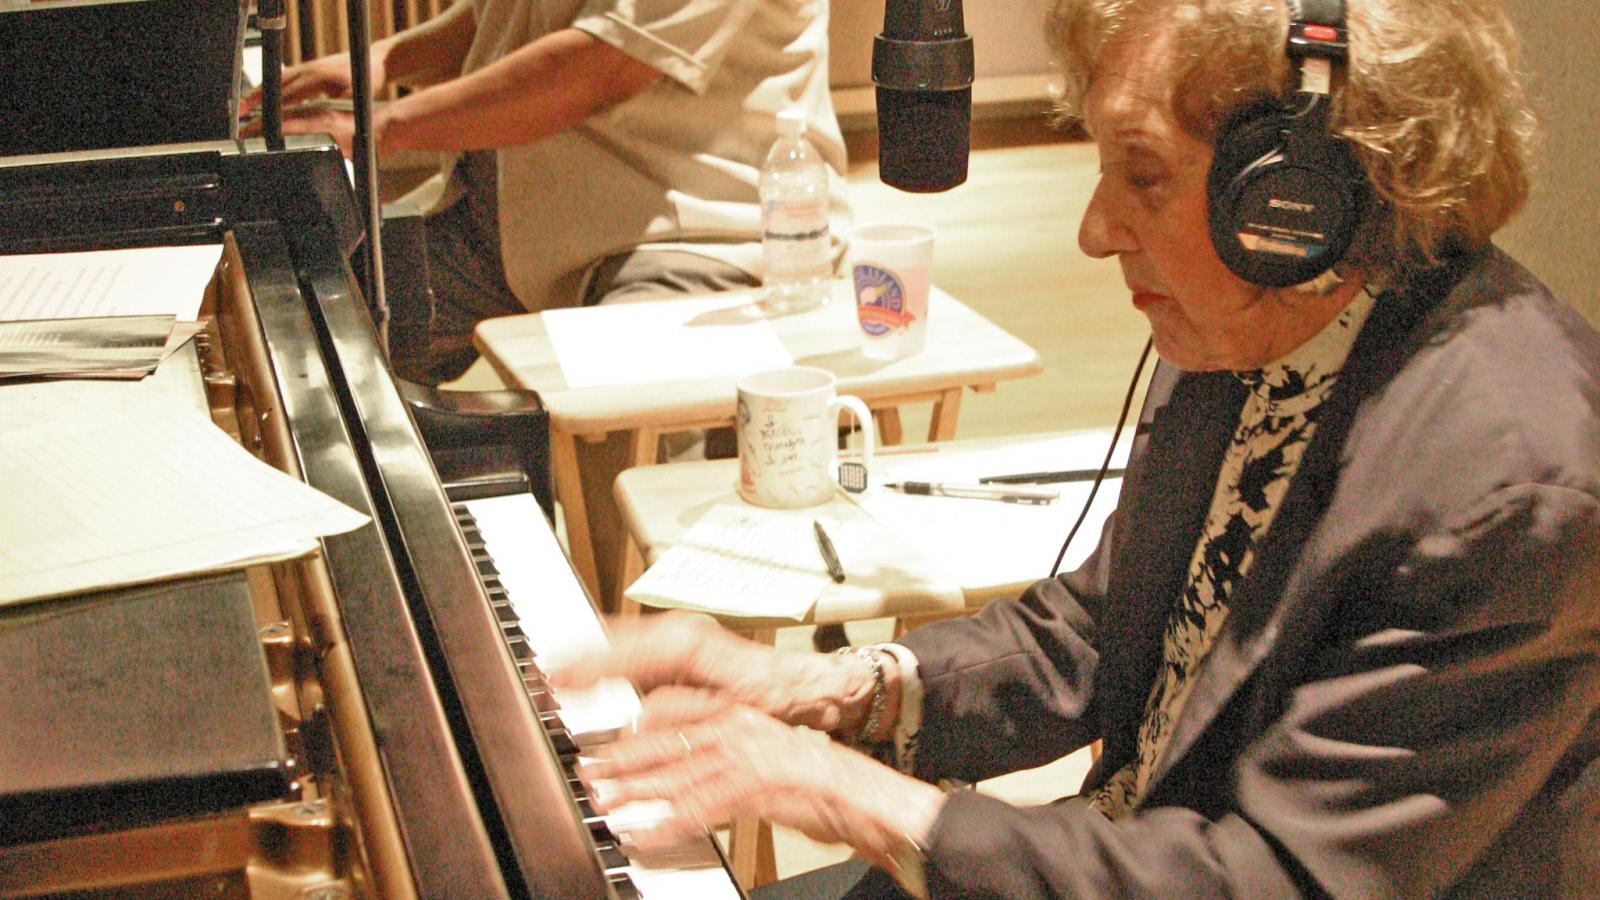 Woman wearing headphones playing piano with African-American man behind her playing piano.